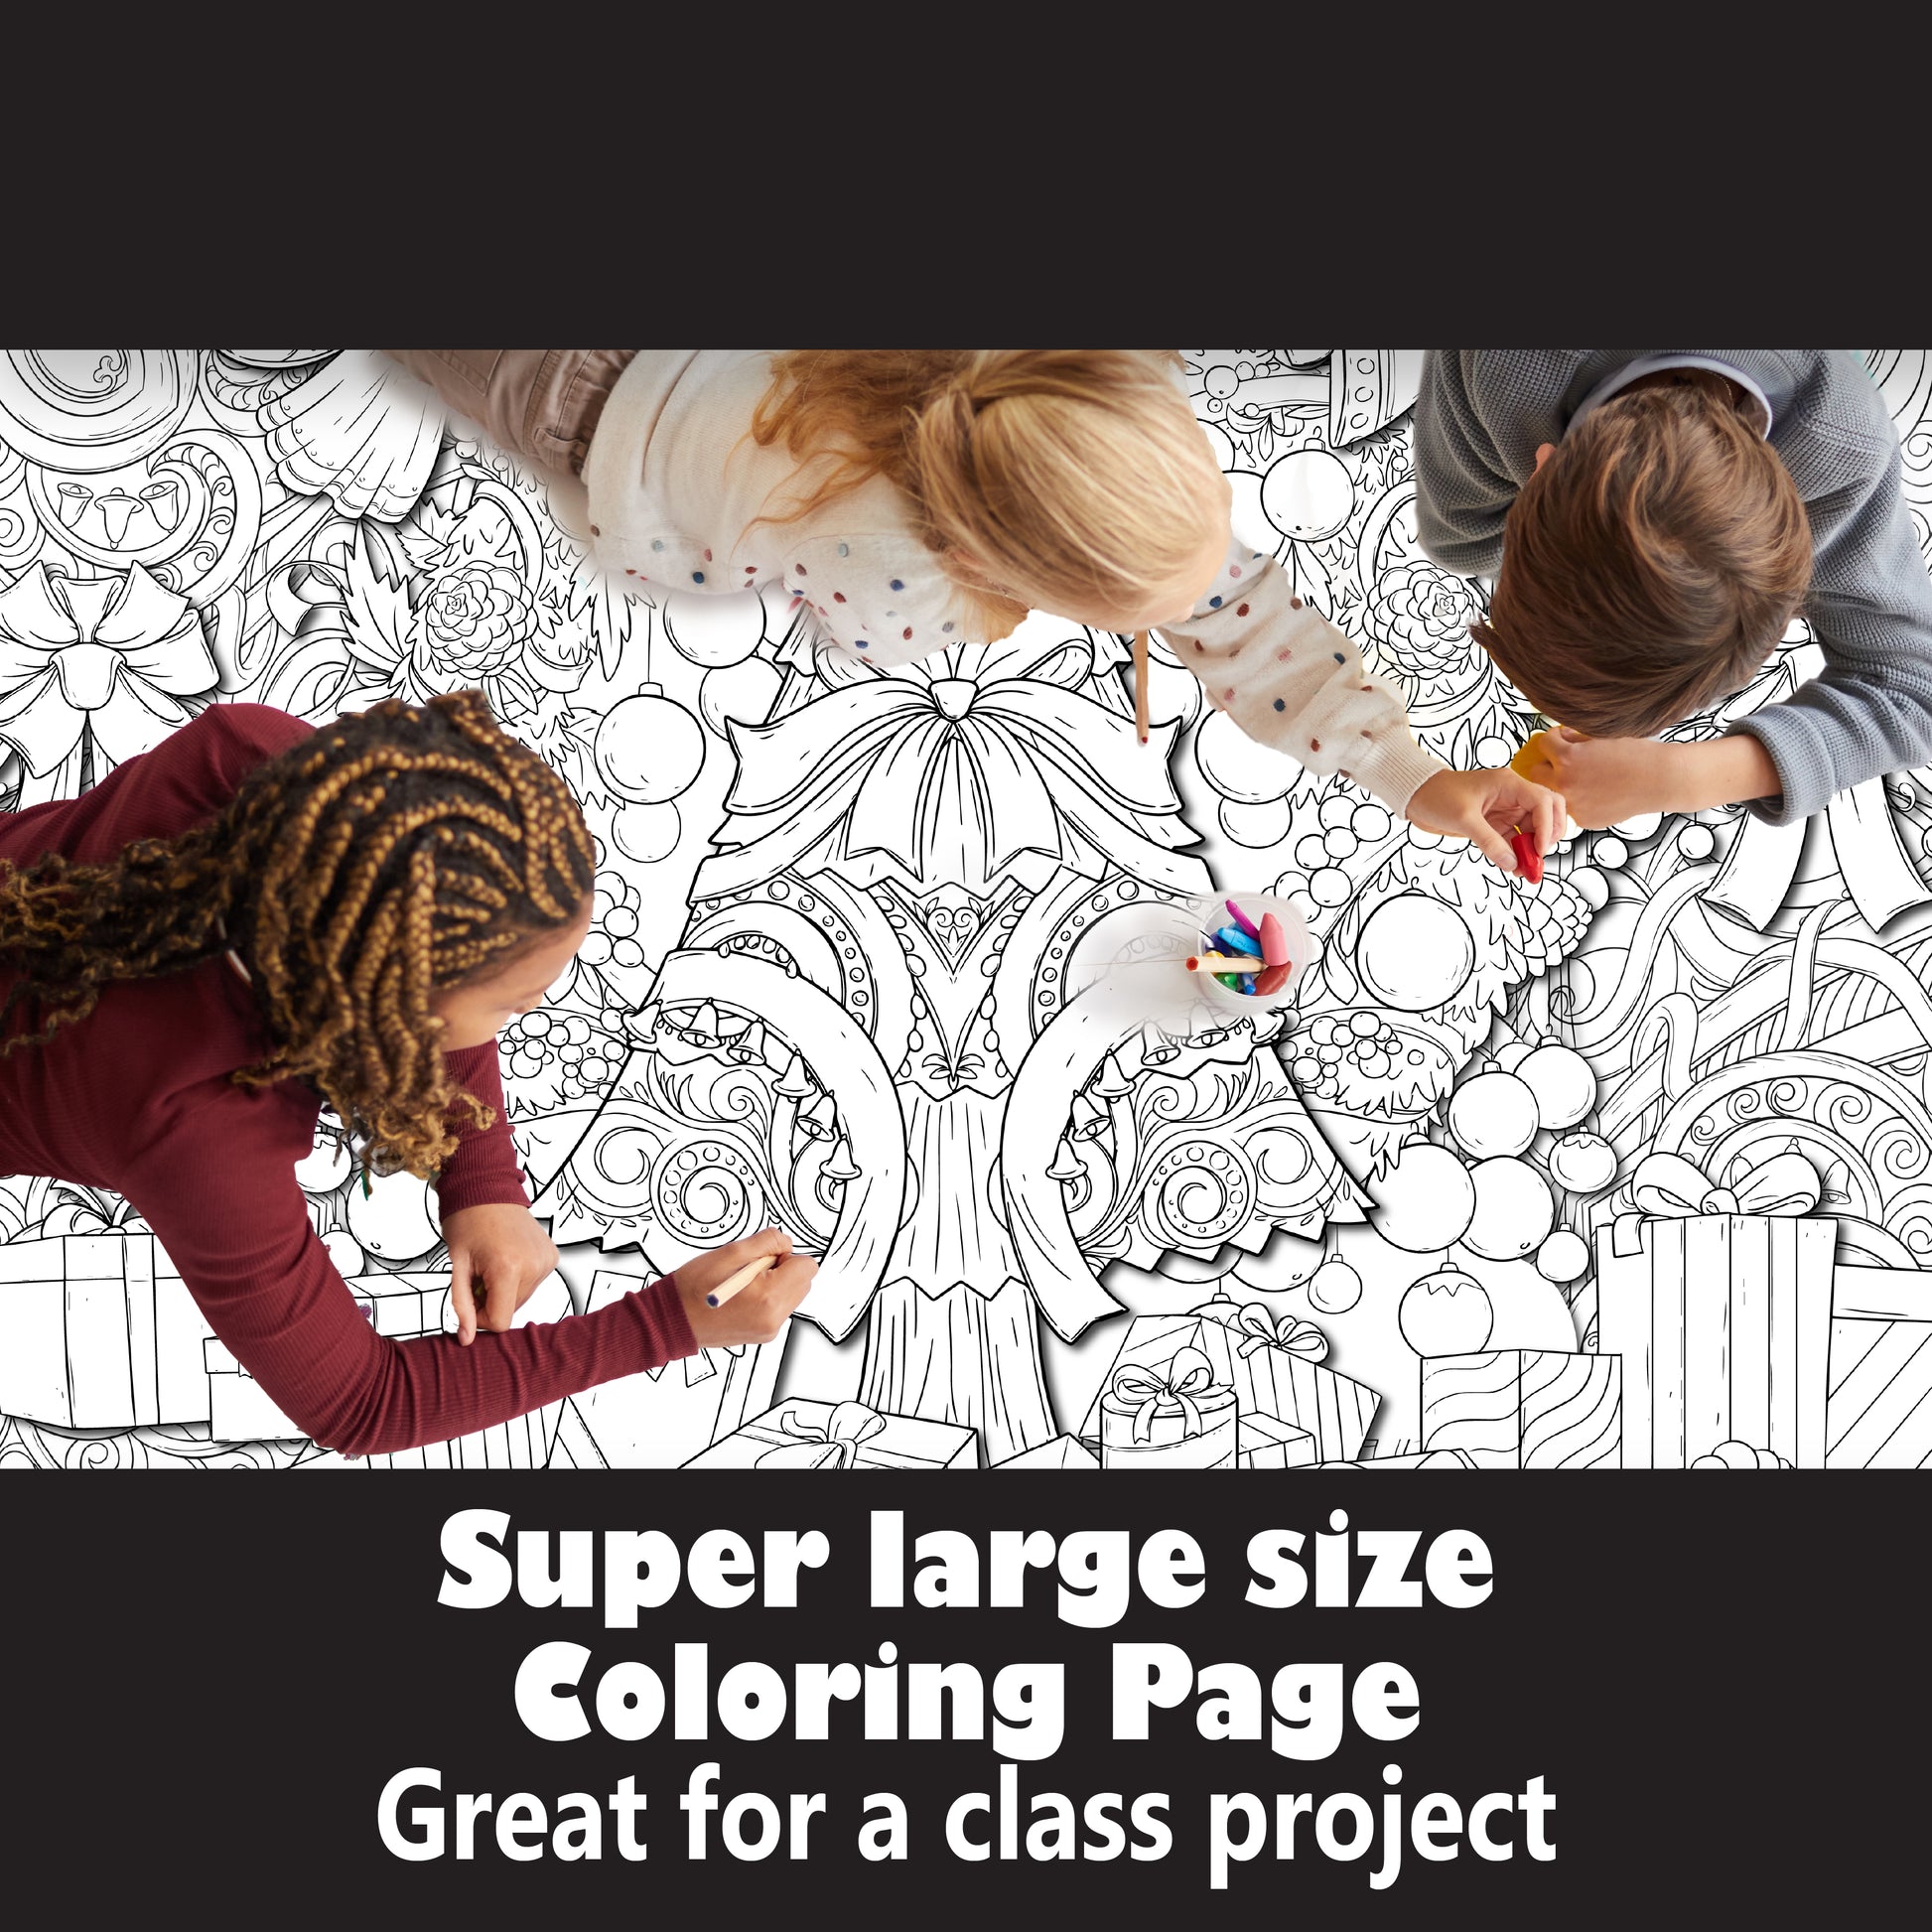 Jumbo Coloring Poster, Giant Coloring Pages For Kids, Wall